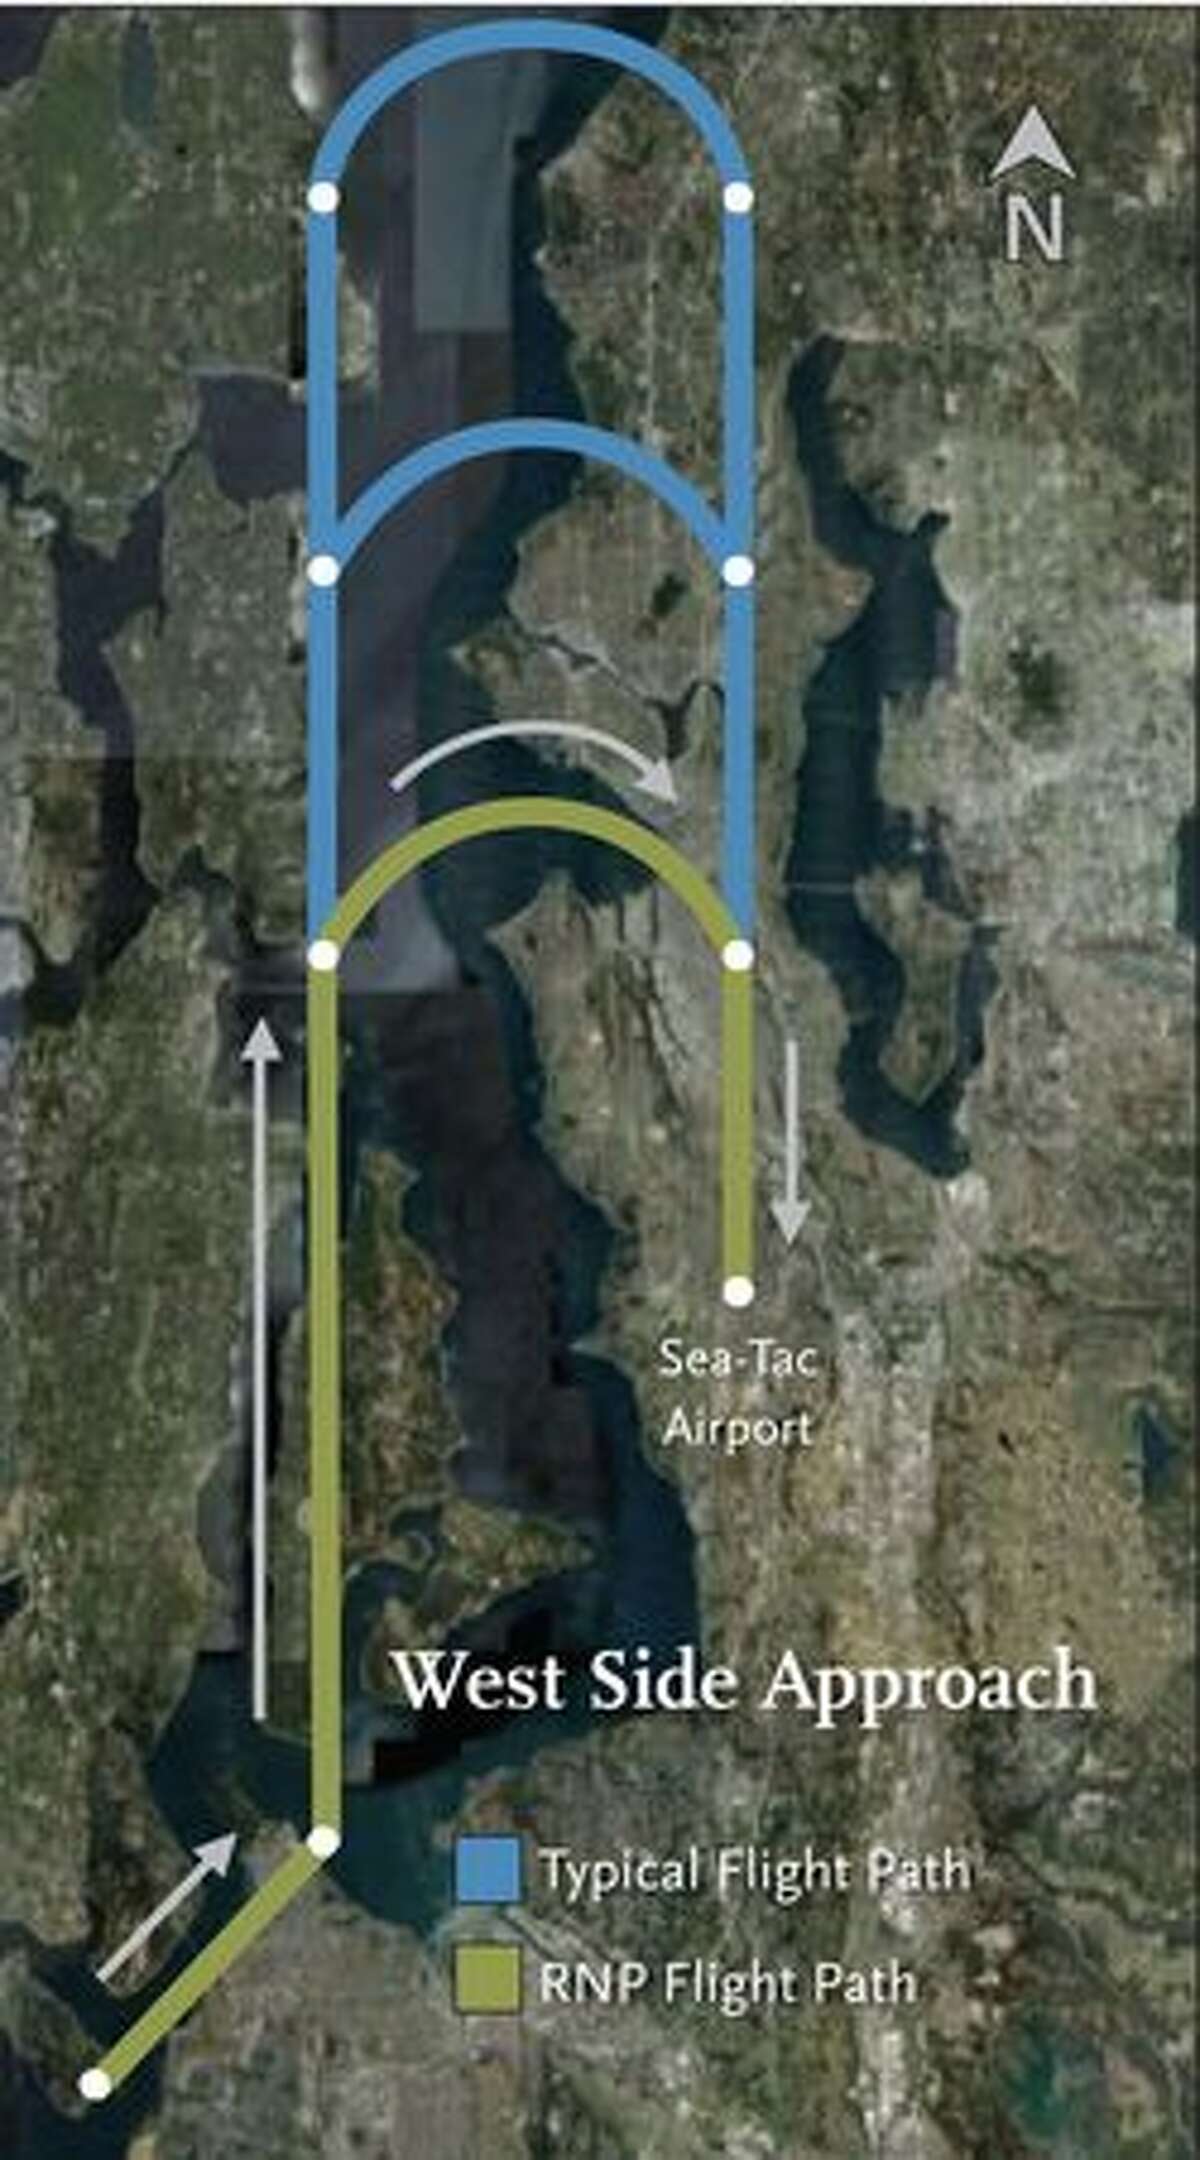 West side approach flight paths to Seattle-Tacoma International Airport with and without RNP (Alaska Airlines image)